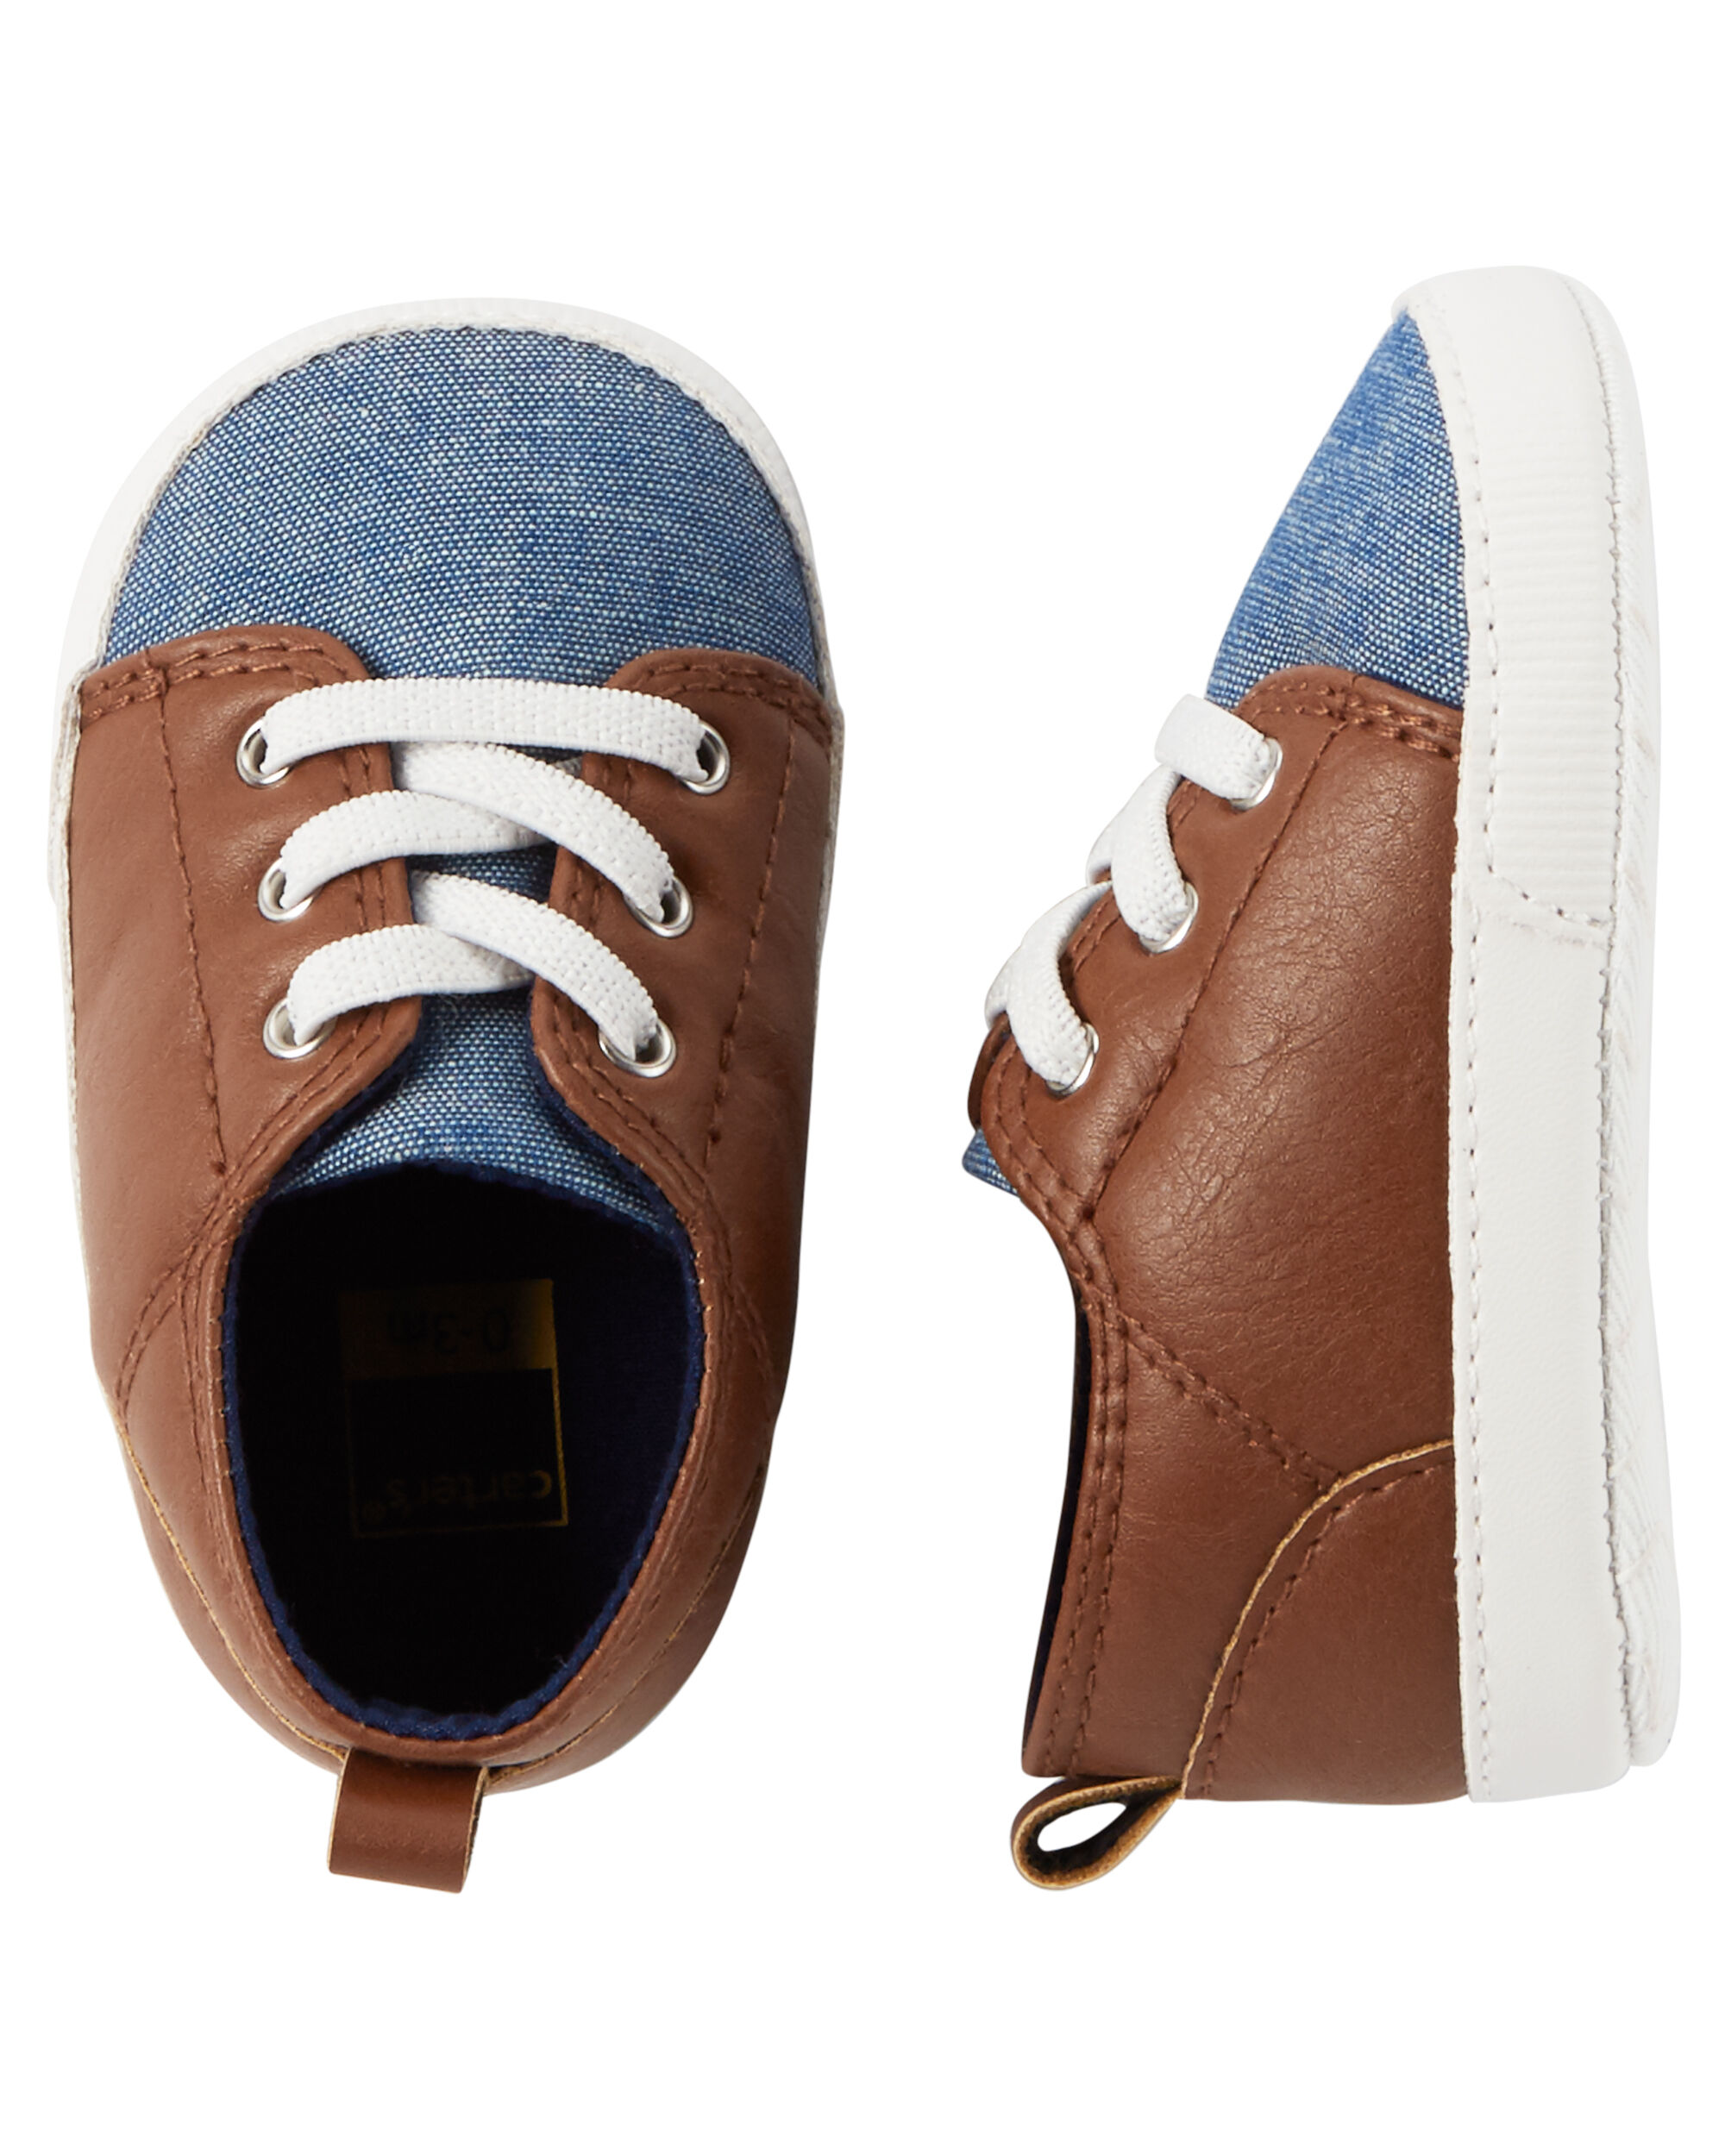 Chambray Sneaker Crib Shoes | Carter's 